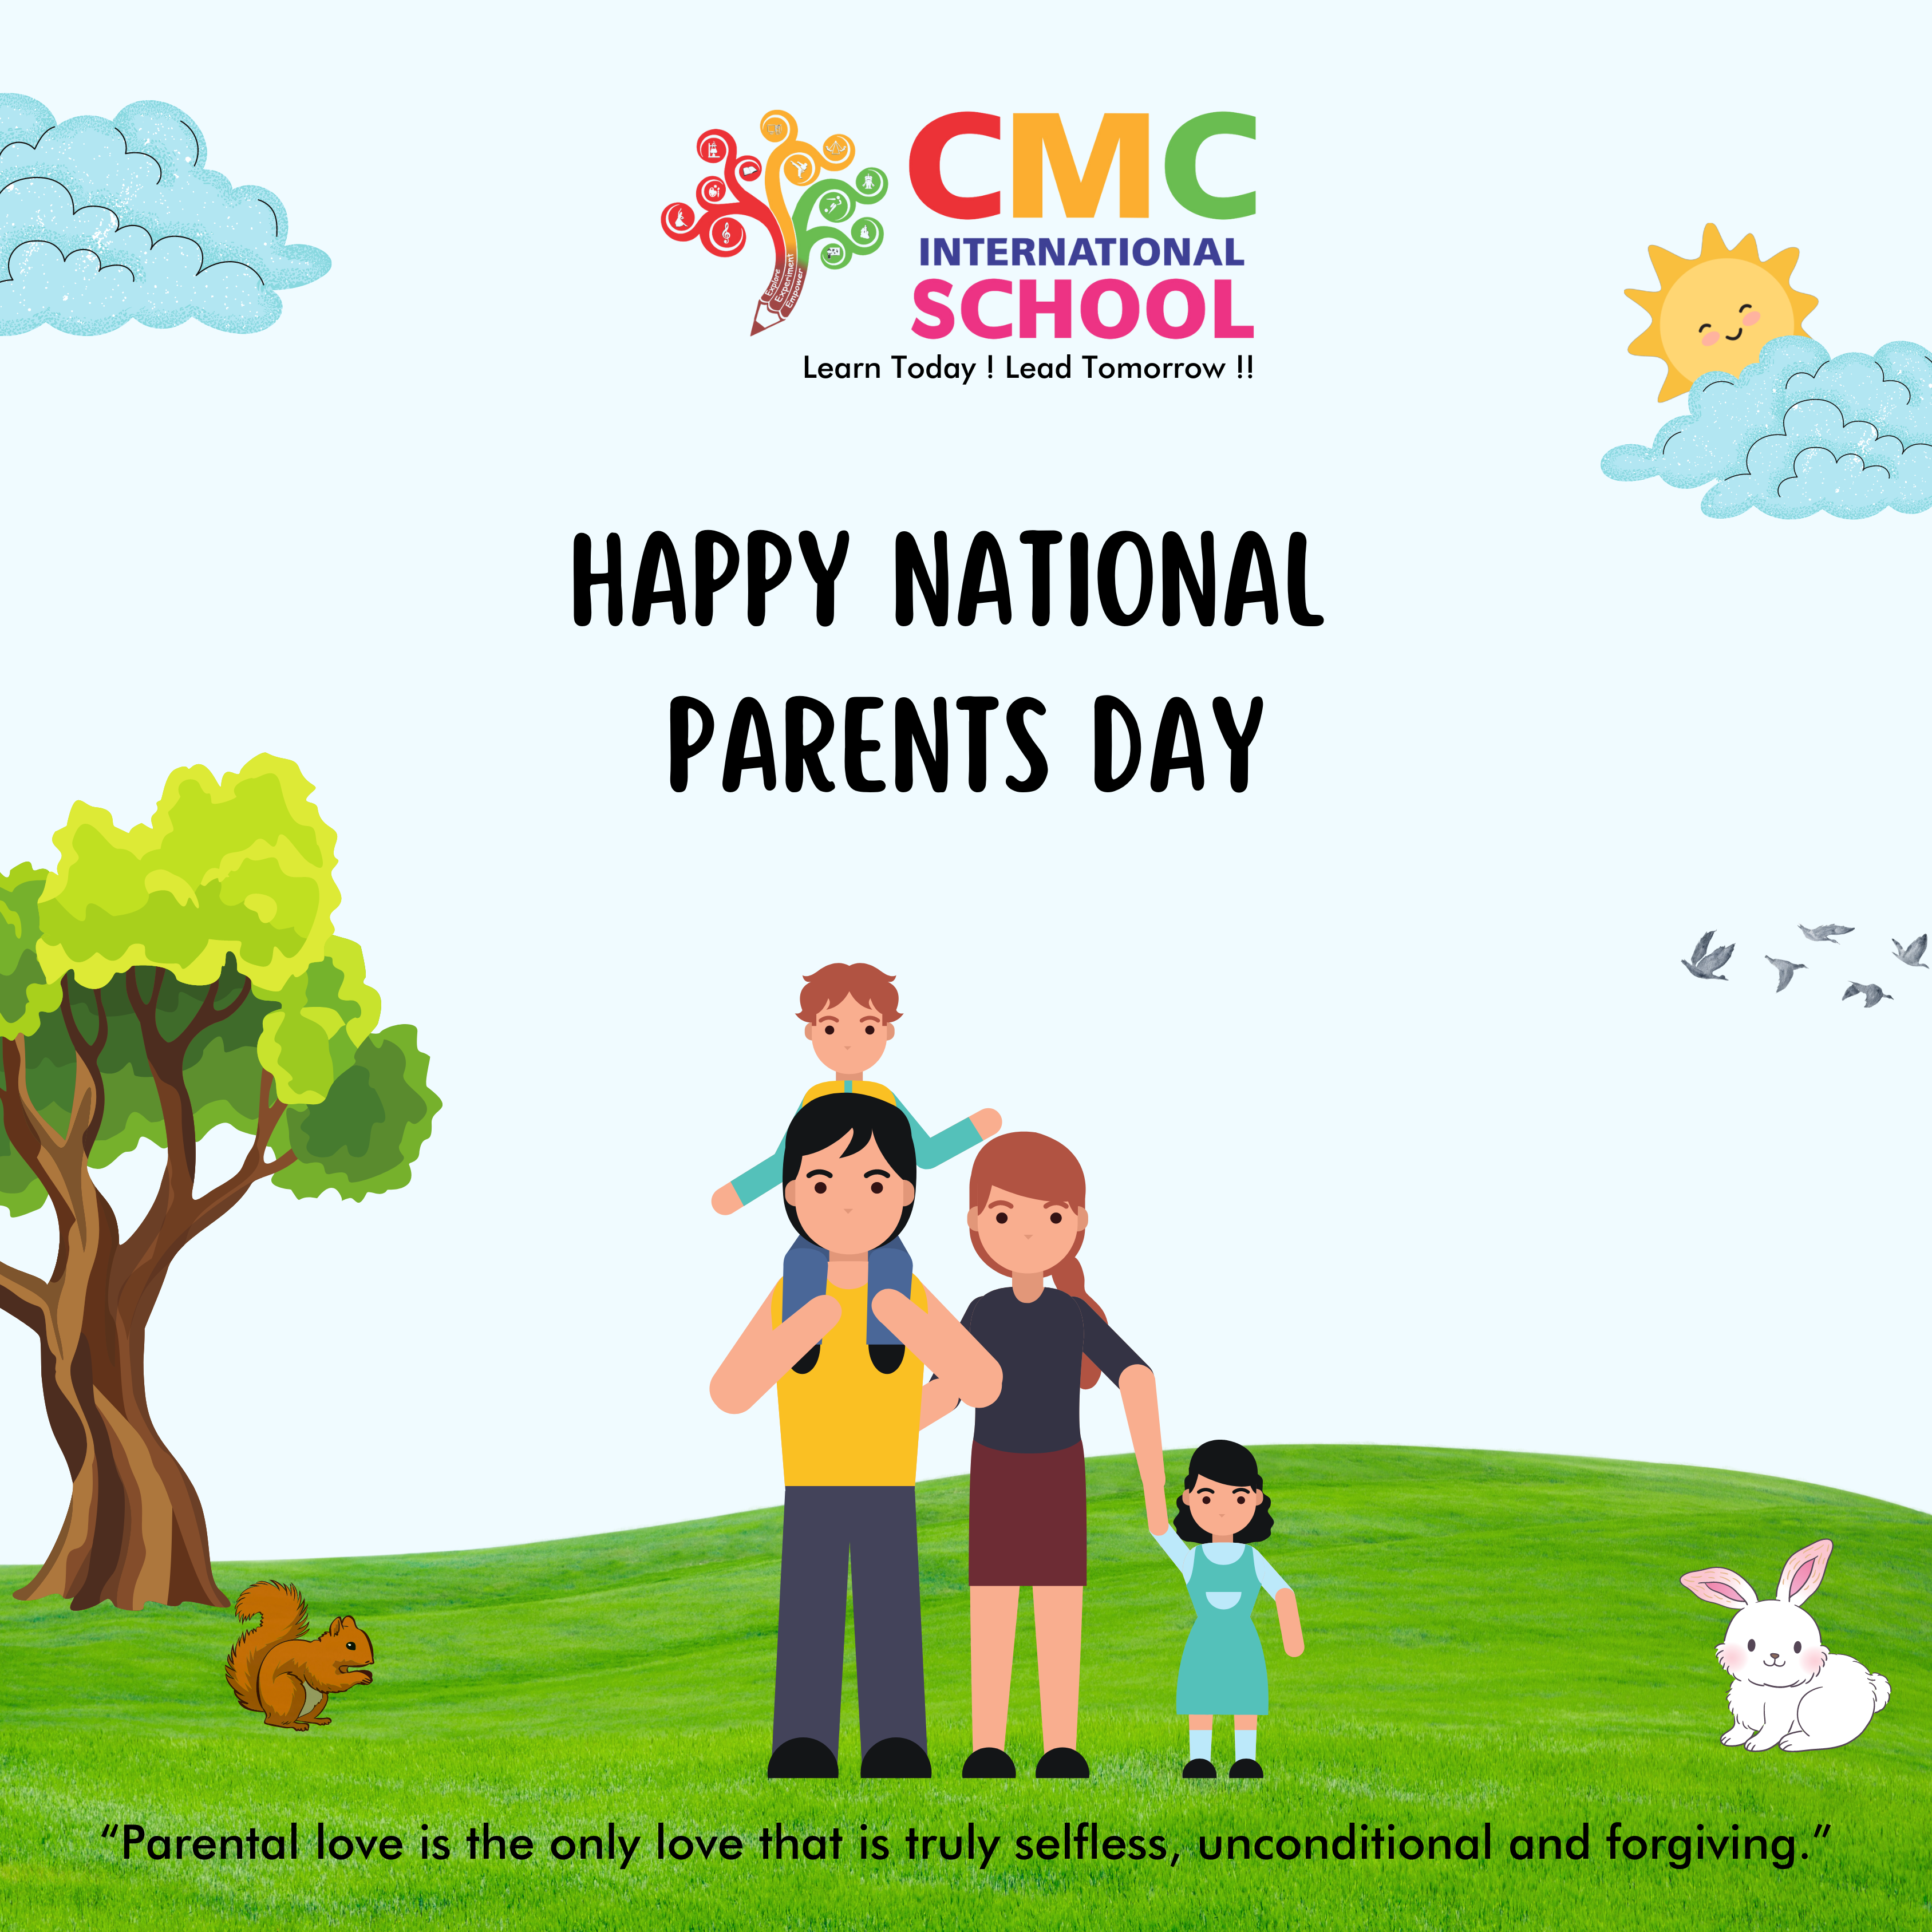 20230724104433_JULY_23_-_NATIONAL_PARENTS_DAY.png